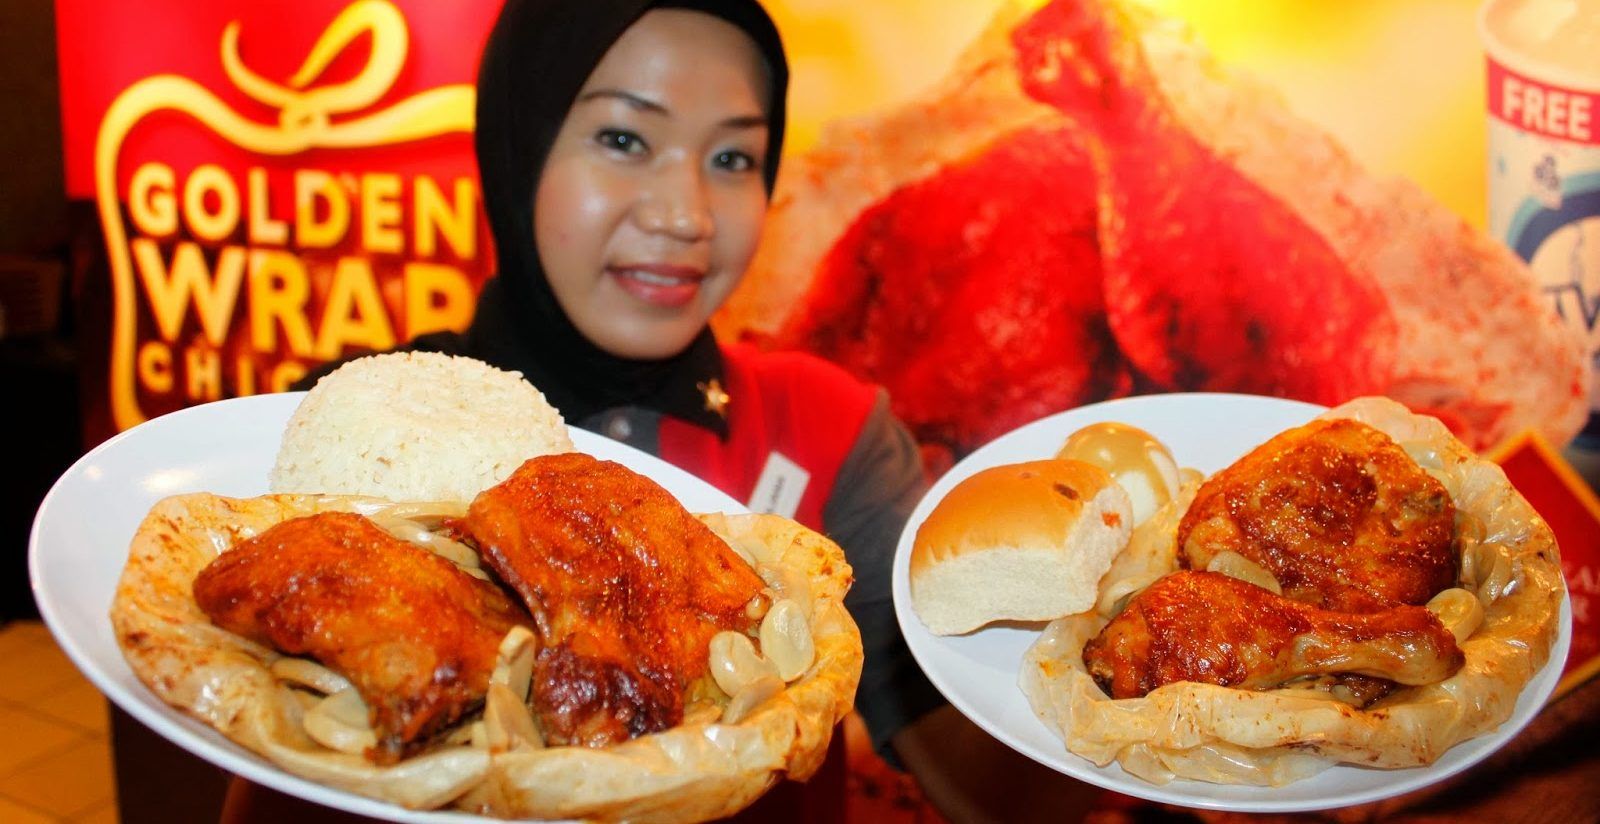 25 Of The Most Unique KFC Menu Items From Around The World